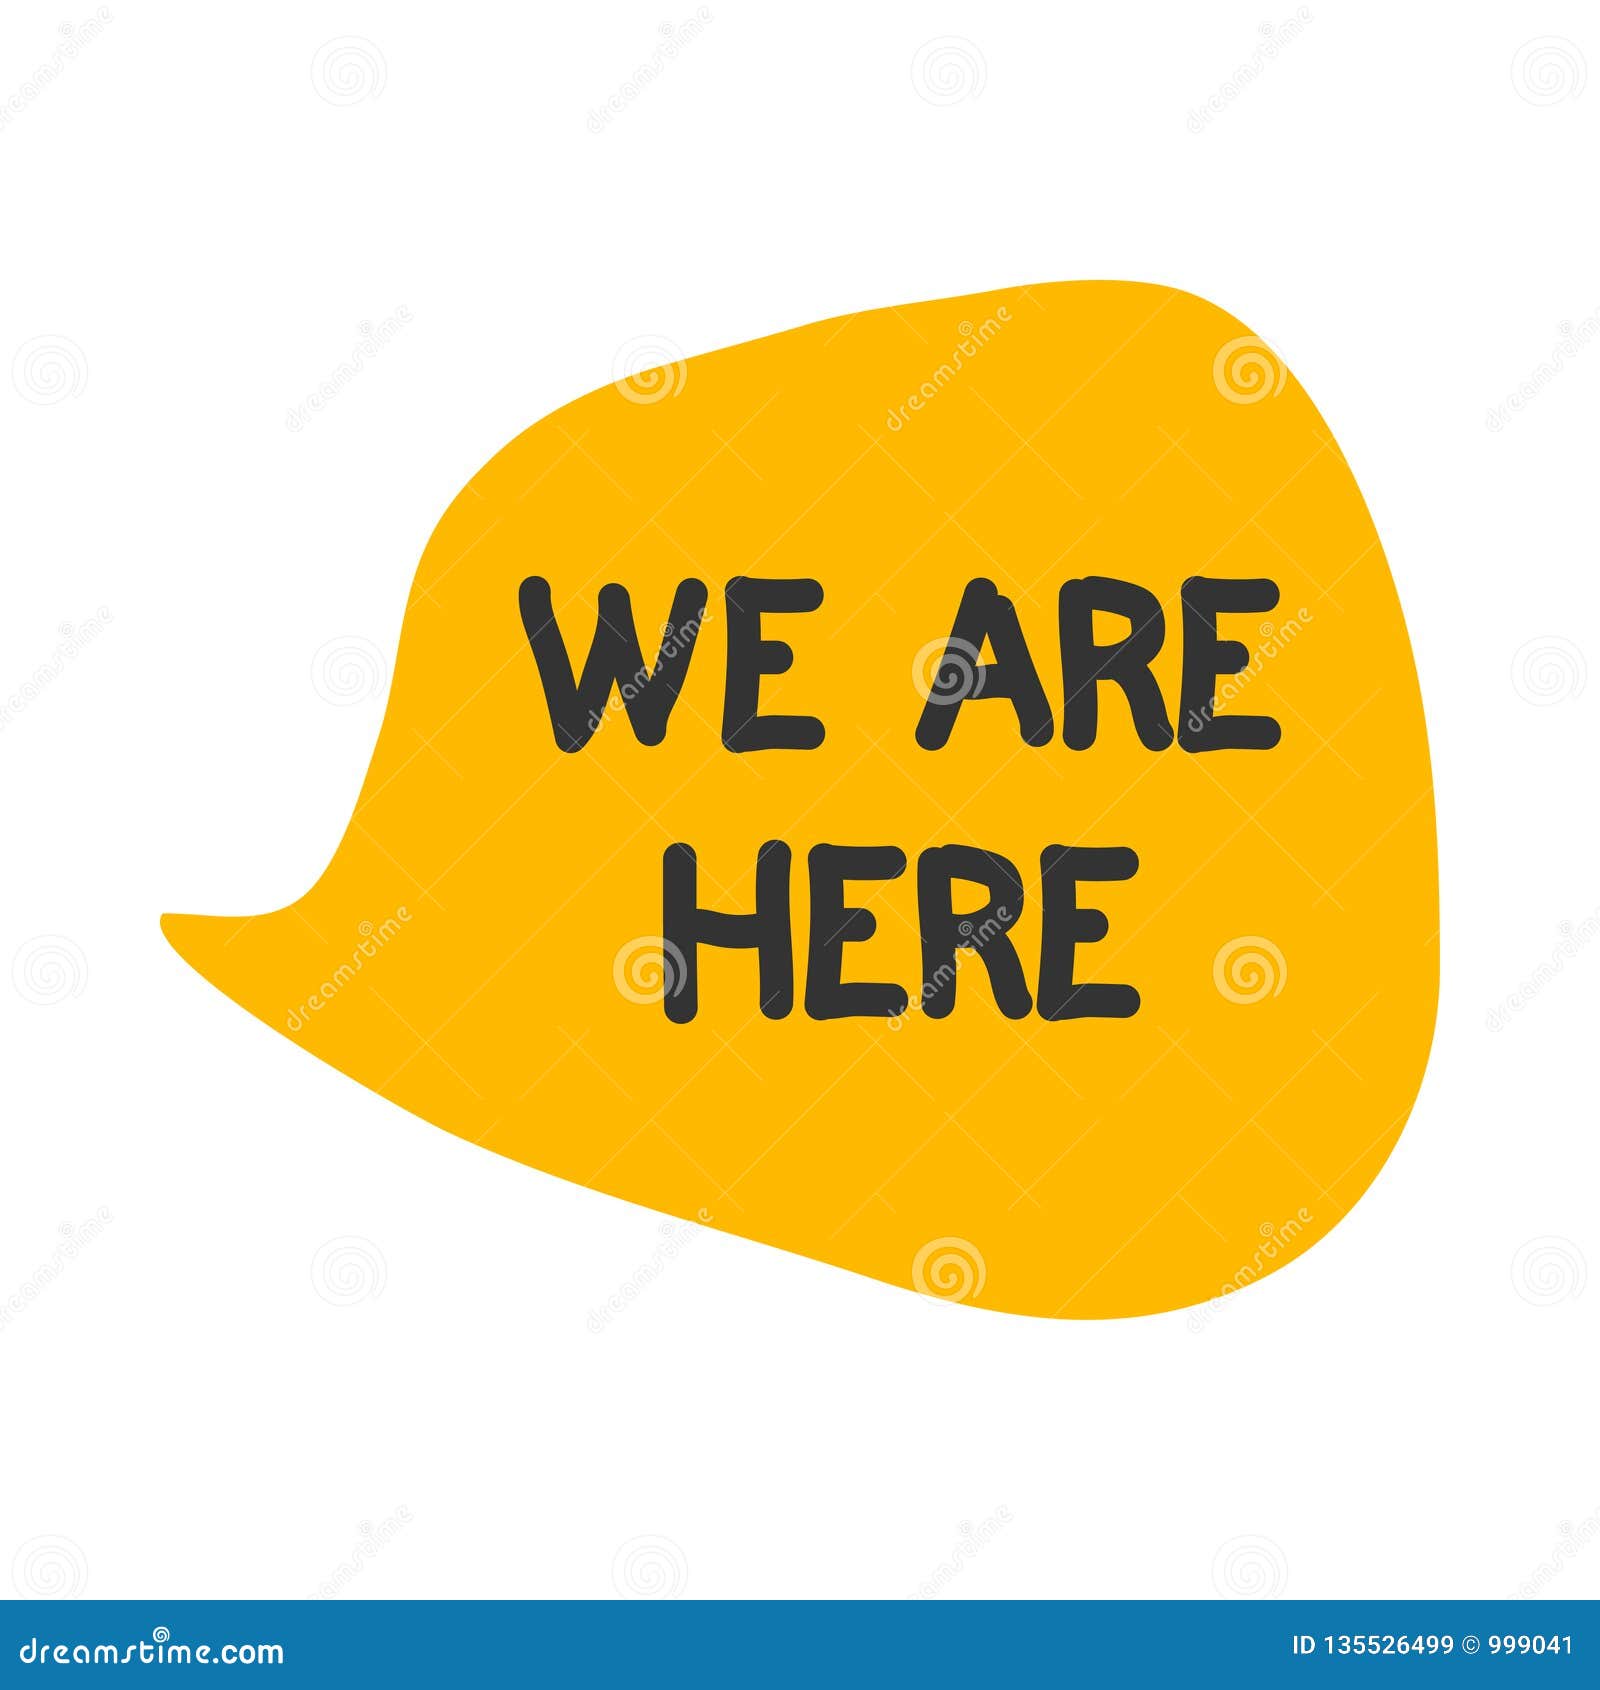 We Are Here Vector Illustration Stock Vector Illustration Of Yellow Offer 135526499